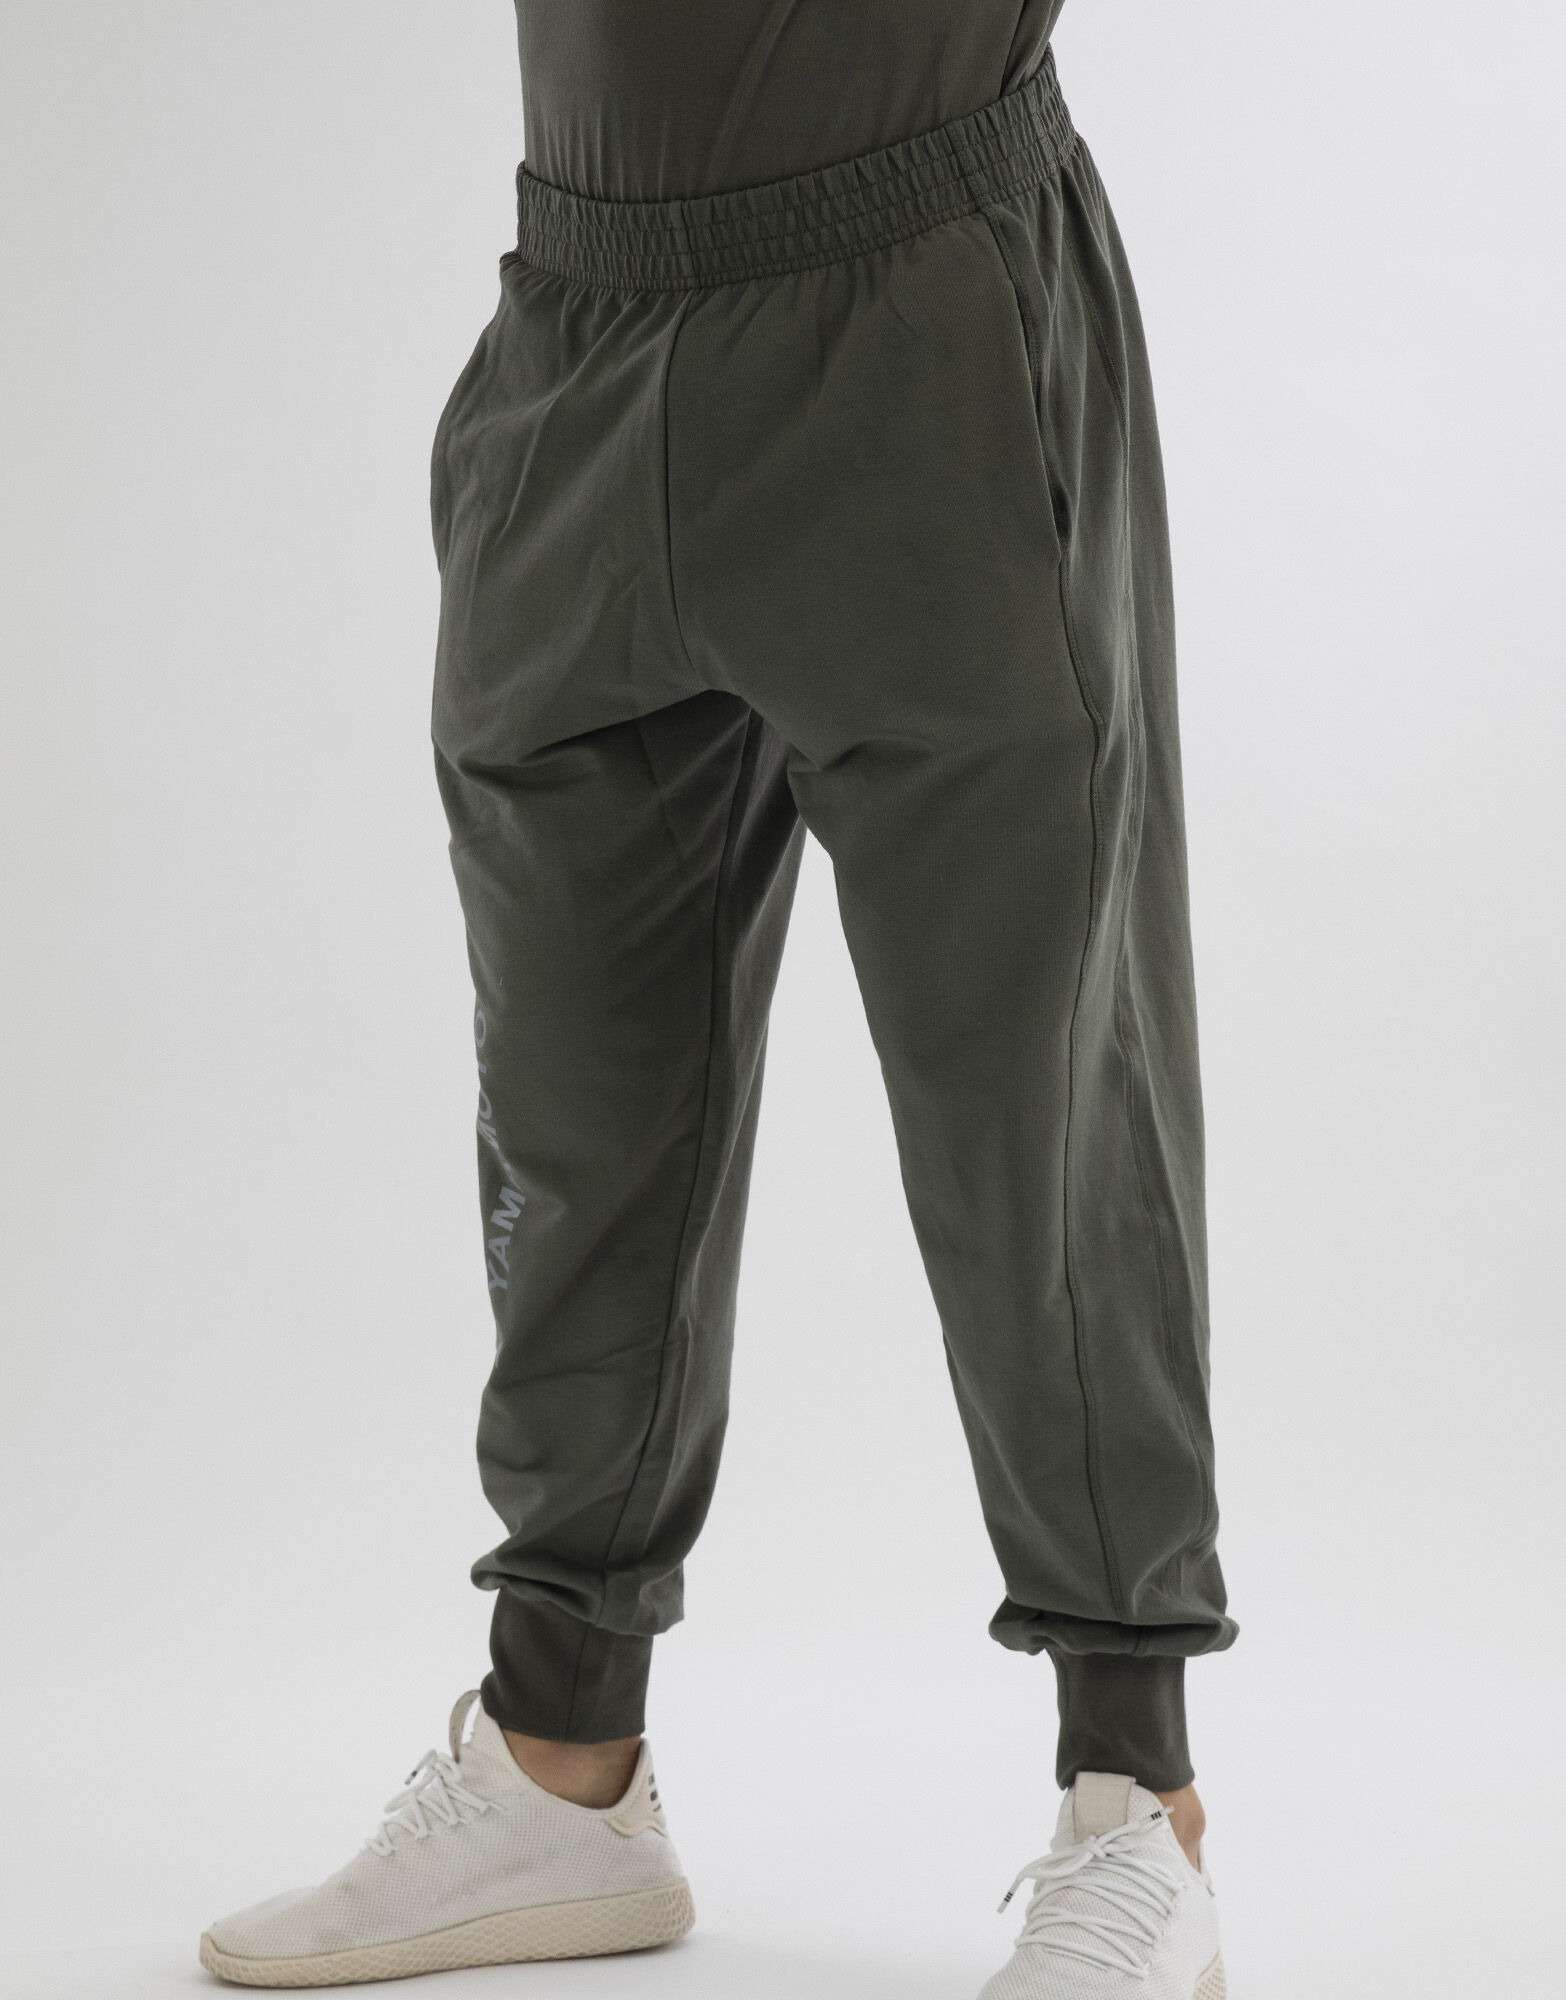 YAMAMOTO OUTFIT Man Pants Lp Colore: Verde Oliva M